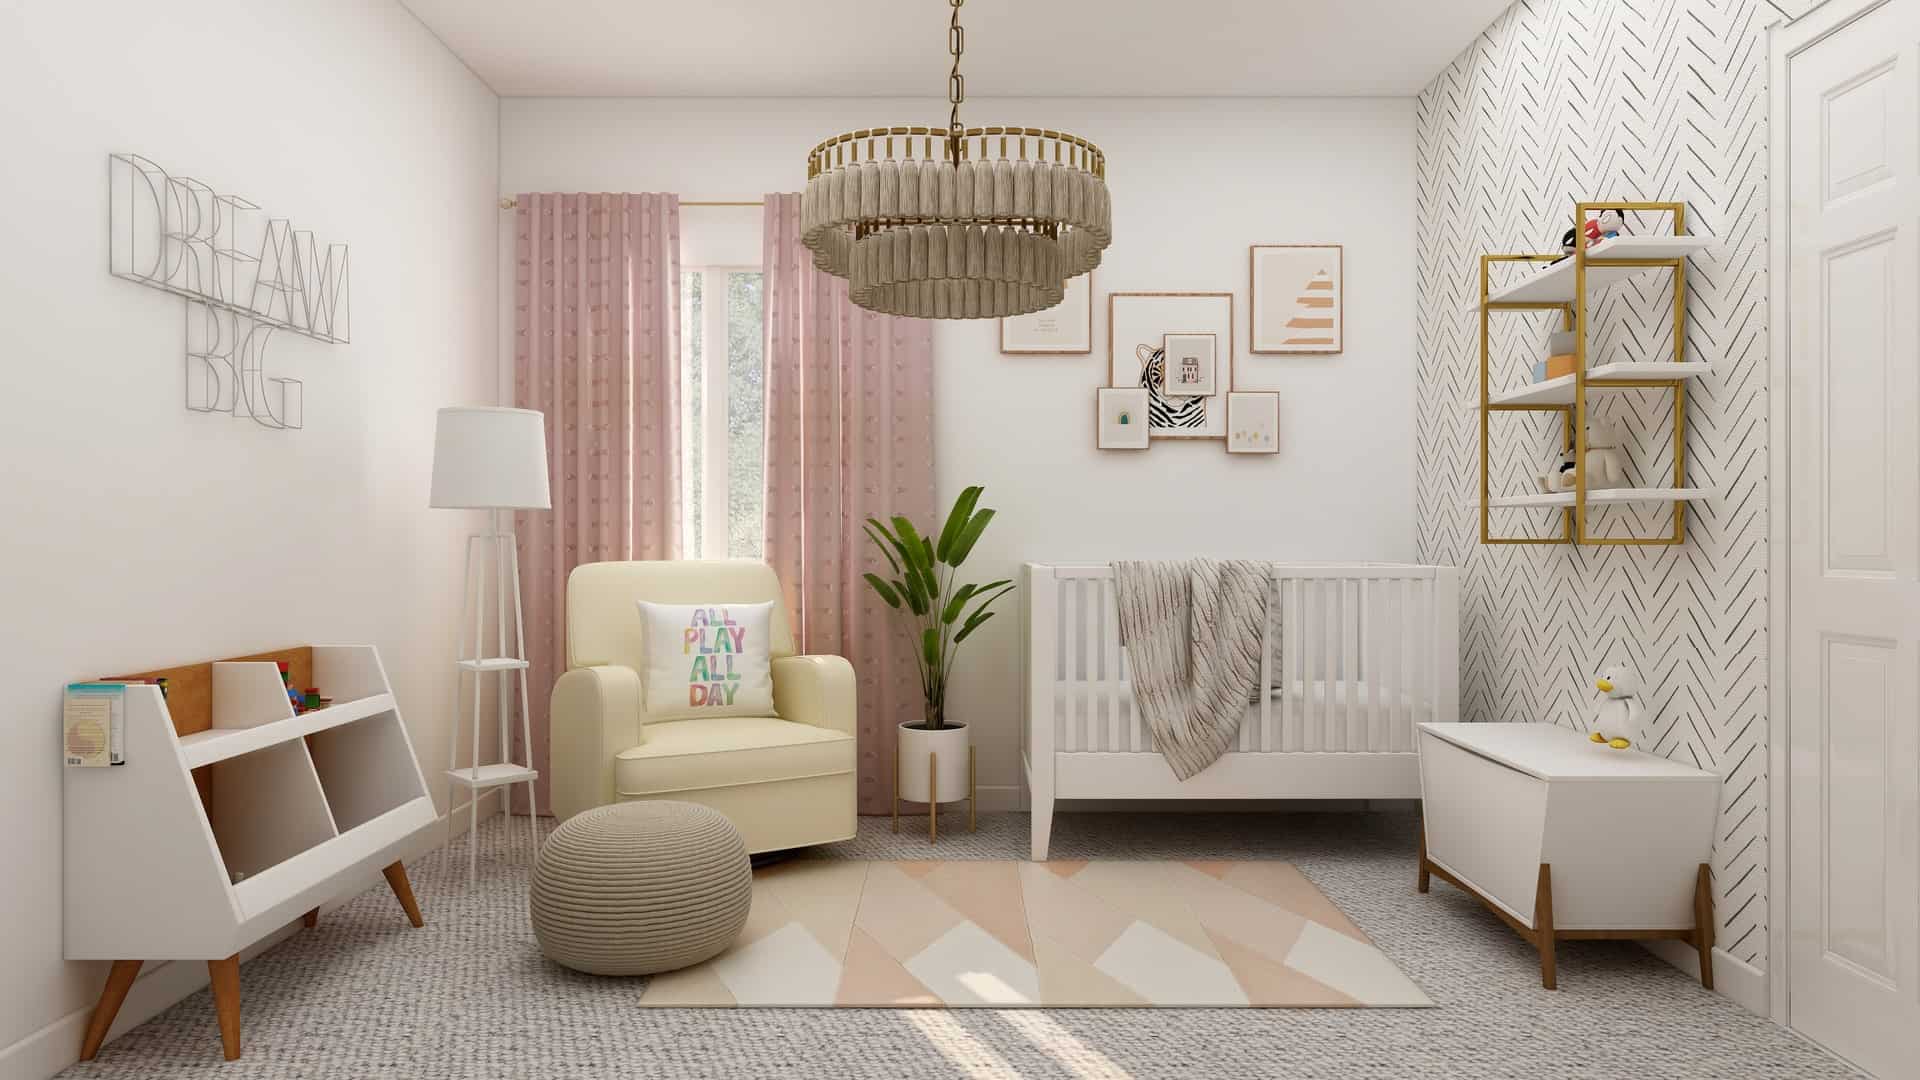 In what style should we decorate a child’s room?